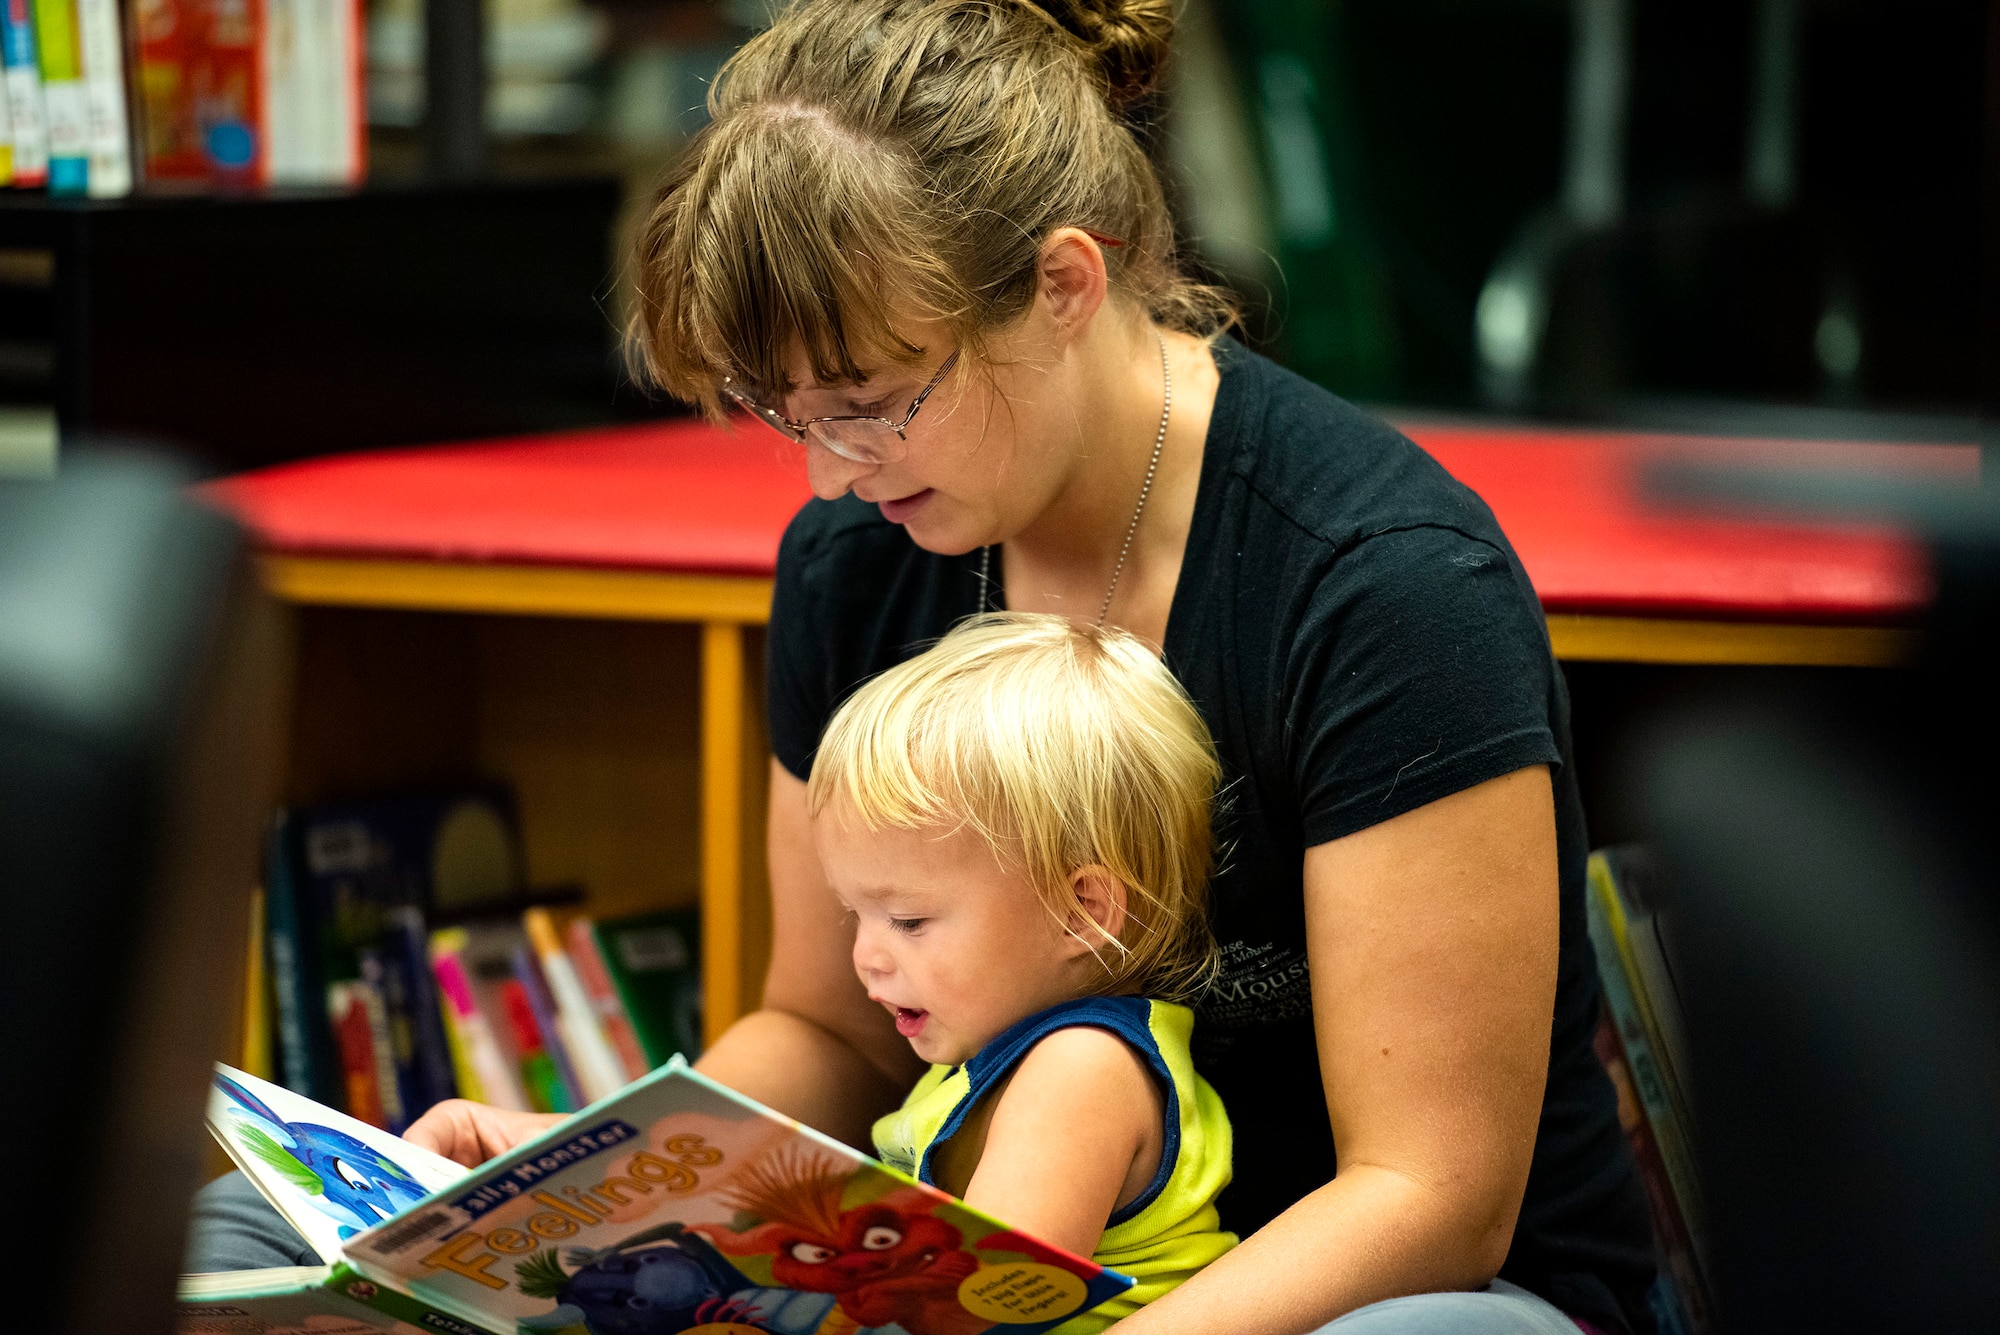 Megan Thorne, military spouse, reads to her son, Layton, Sept. 5, 2019, at Moody Air Force Base, Ga. The Information Learning Center provides a means of morale and serves as the central hub for all informational and educational growth for Airmen and families. (U.S. Air Force photo by Senior Airman Erick Requadt)